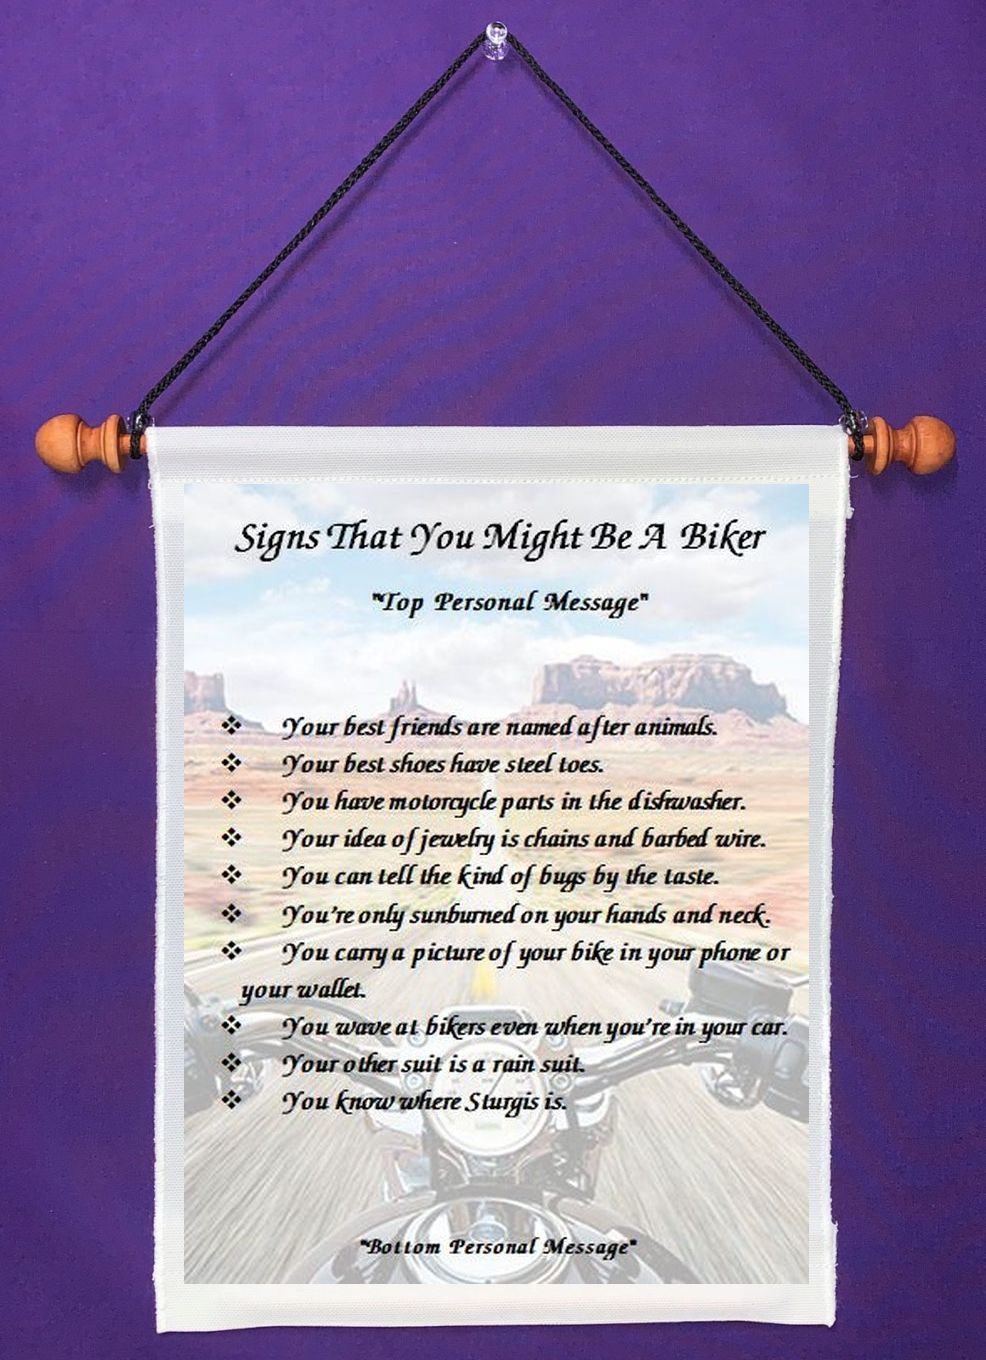 Signs That You Might Be A Biker - Personalized Wall Hangings (1092-1) - $18.99